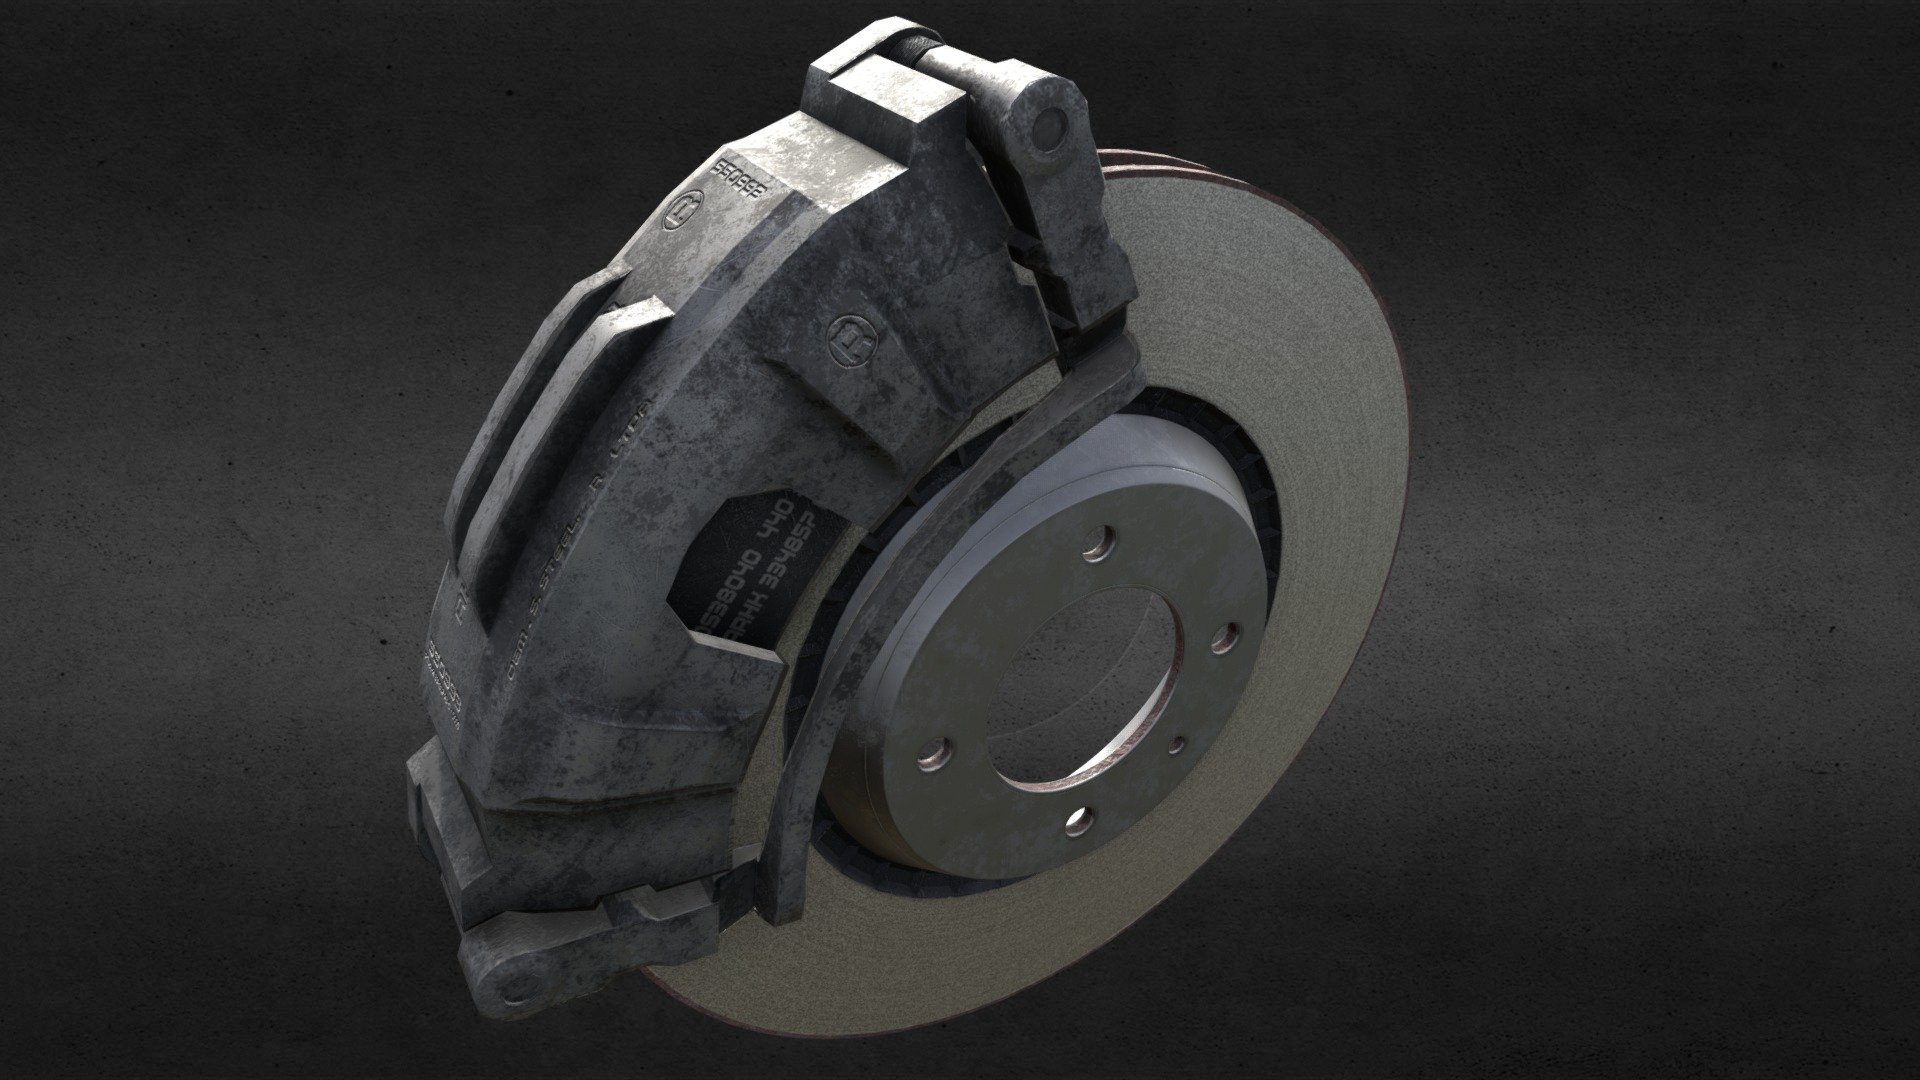 Realistic Texturized brakes.
PBR material - 4K

original creation - free to use and modify for any purpose 3d model